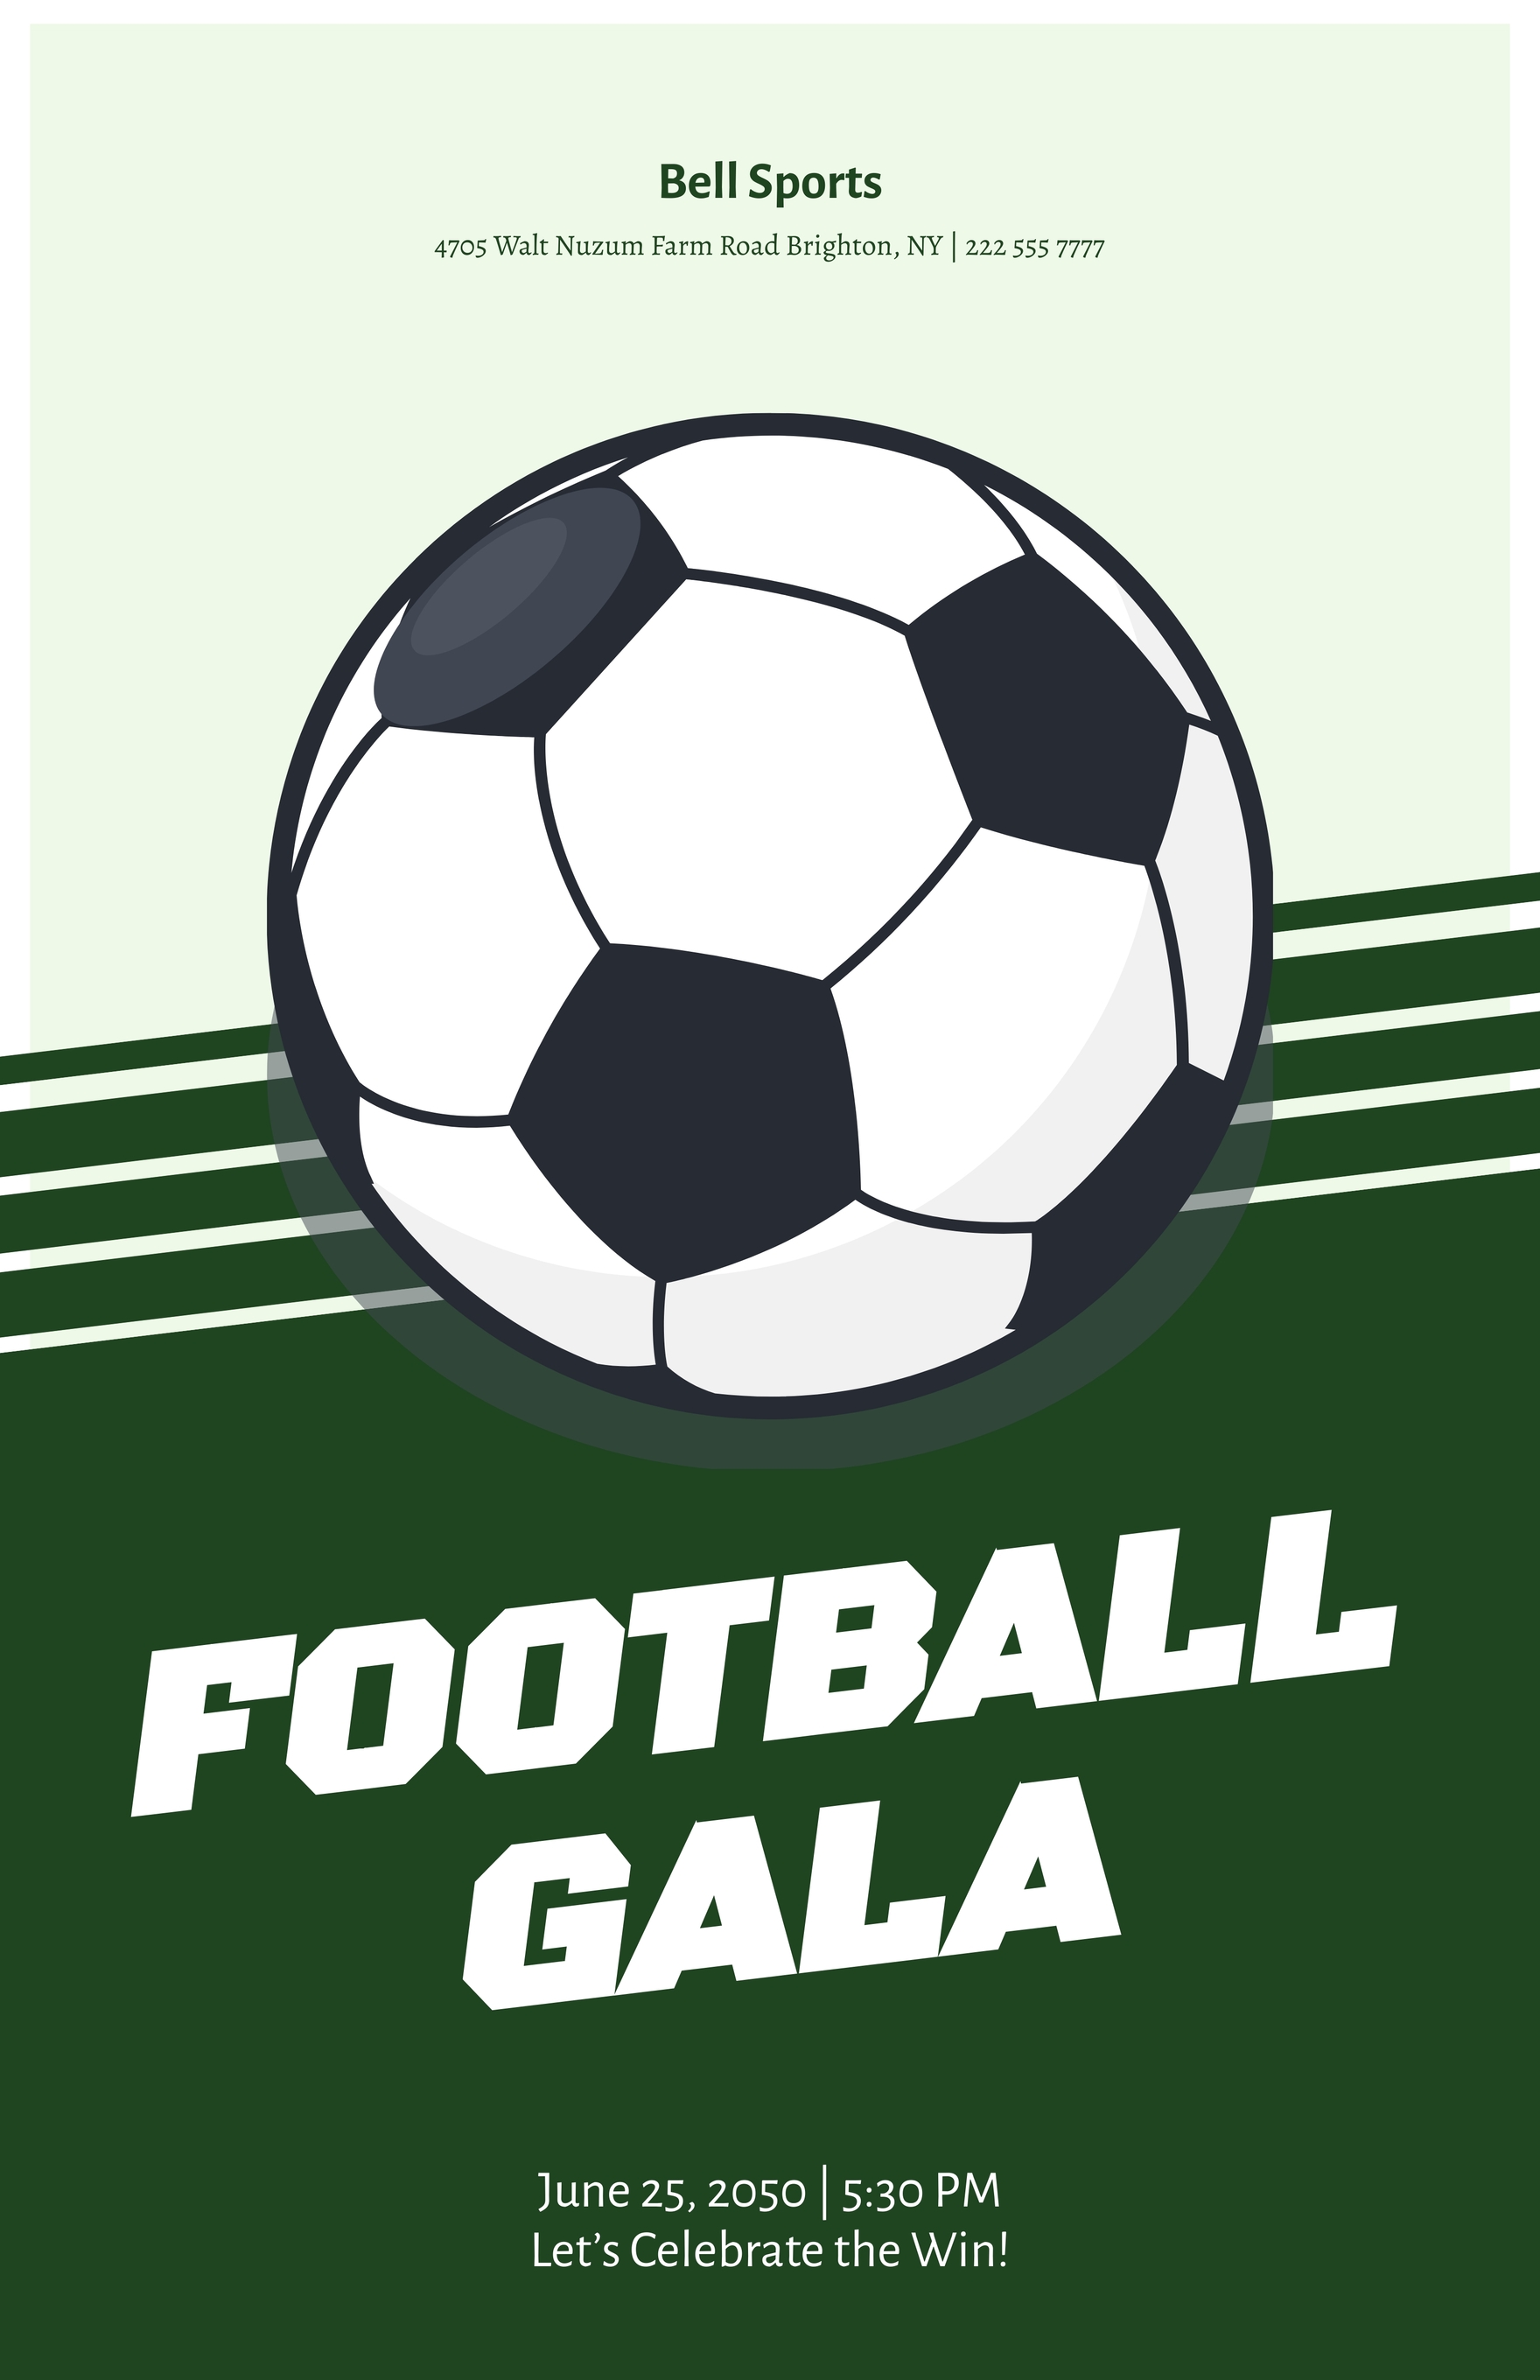 Football Gala Poster Template Download In Word Google Docs Illustrator PSD Apple Pages 